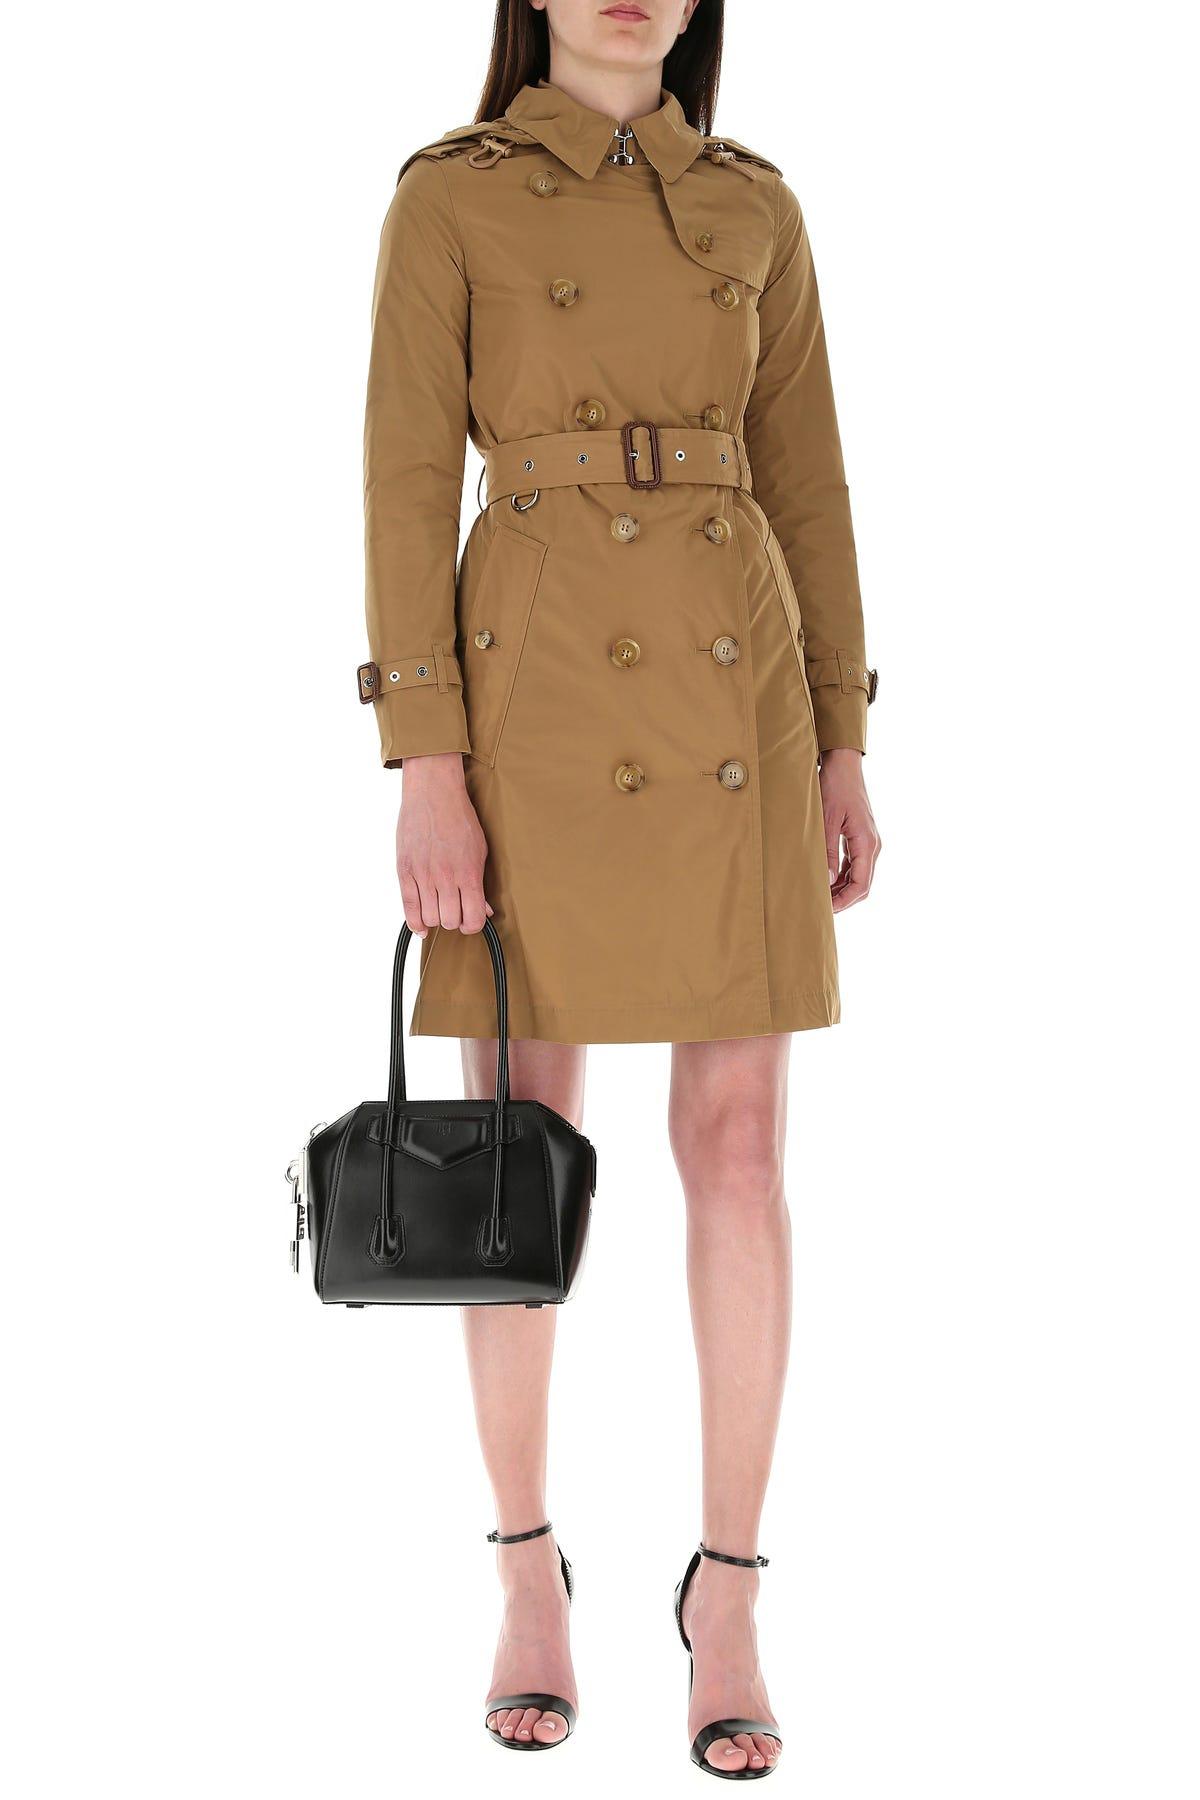 Burberry Synthetic Kensington Trench Coat in Beige (Natural) - Lyst